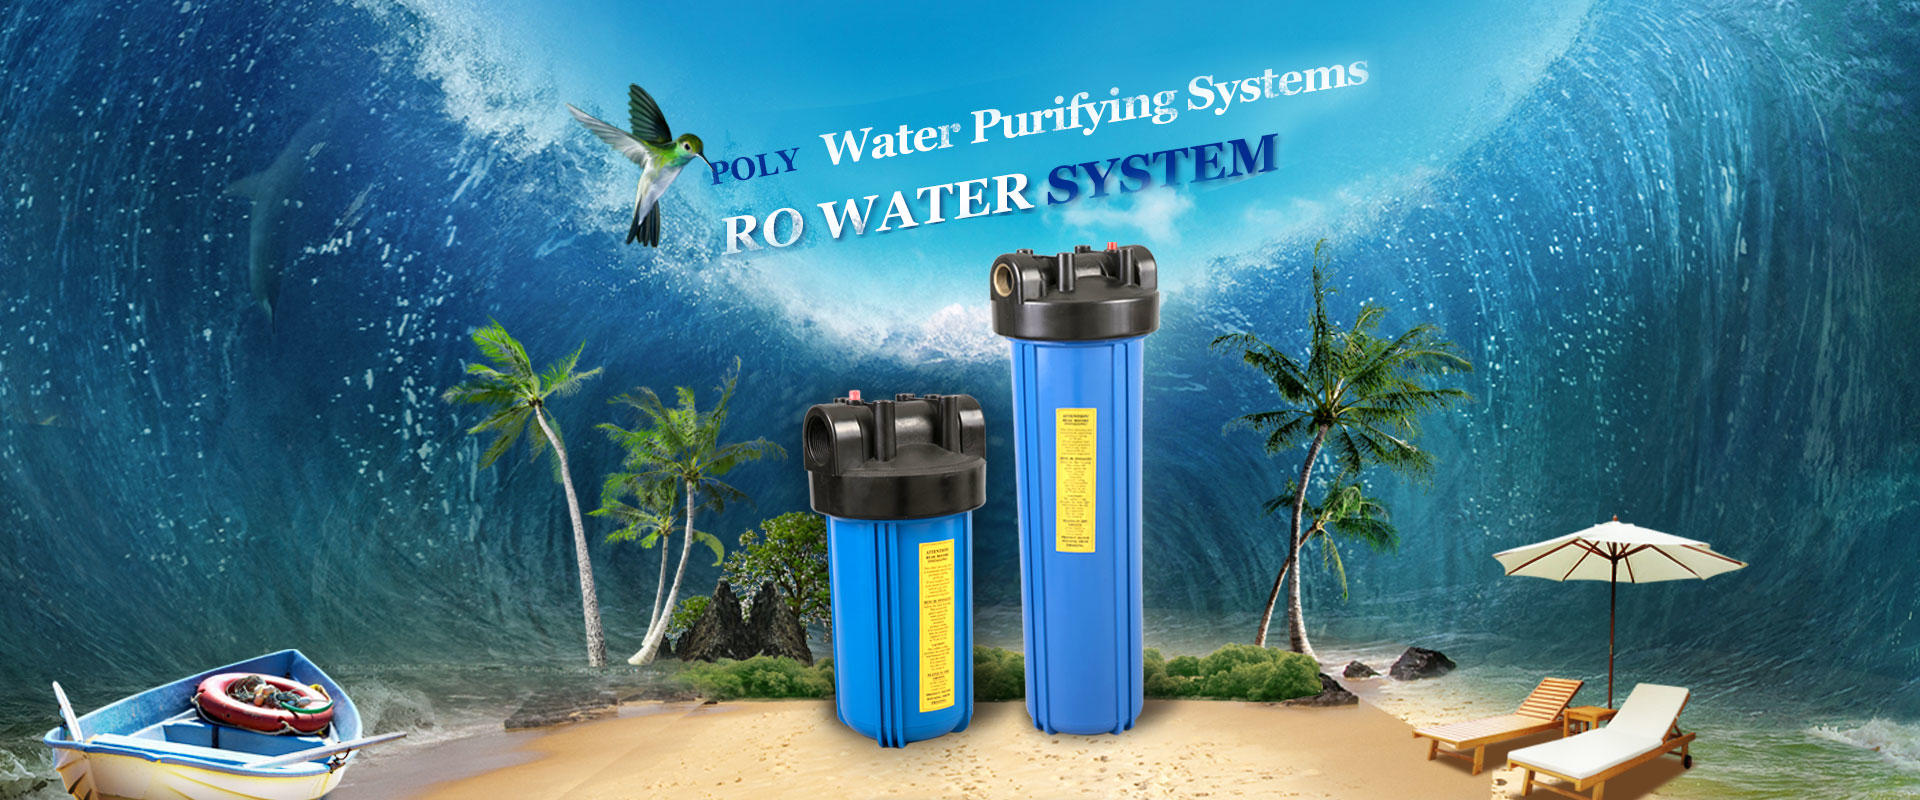 Yuyao Poly Water Purifying Systems Co., Ltd.